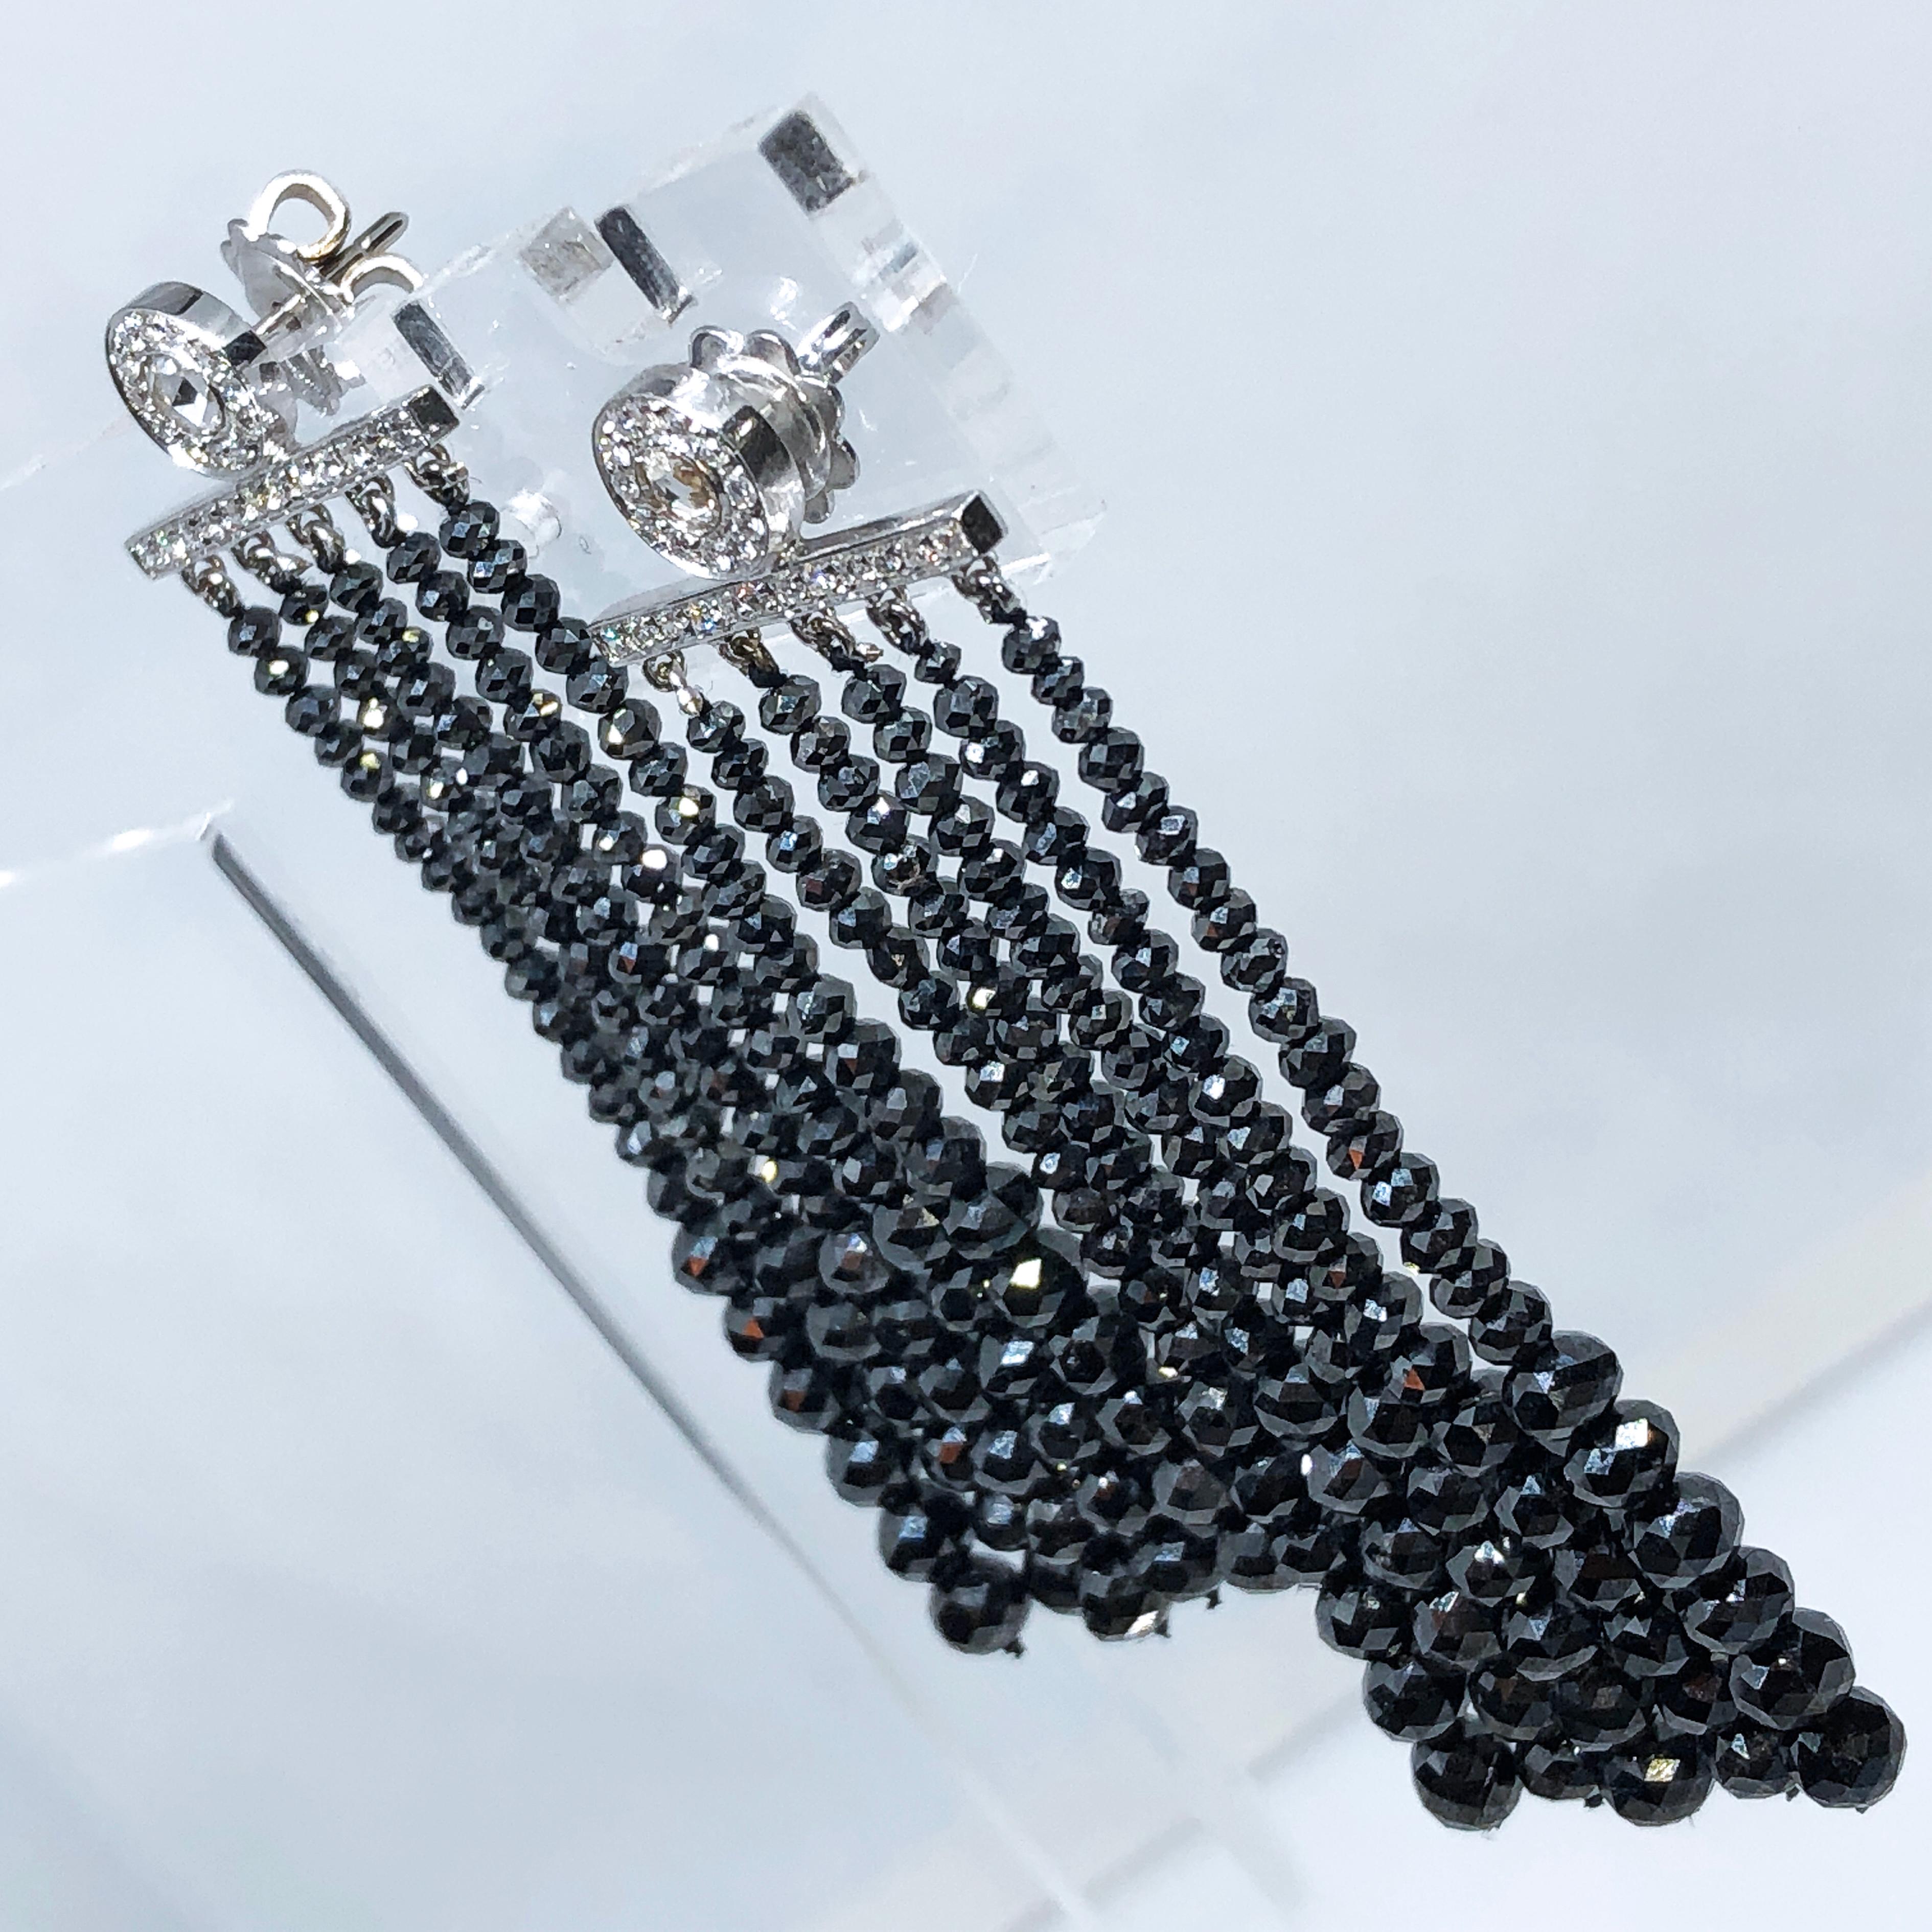 Outstanding, Chic Yet Timeless One-of a kind Dazzling Chandelier Earrings featuring 75.37 Kt Natural Black Diamond 0.59Kt White Diamond(D-E, VVs1) two 0.29 Kt Antique Rose Cut Diamond, total weight 75.25 Kt , 18kt White Gold Setting.
Earrings Total